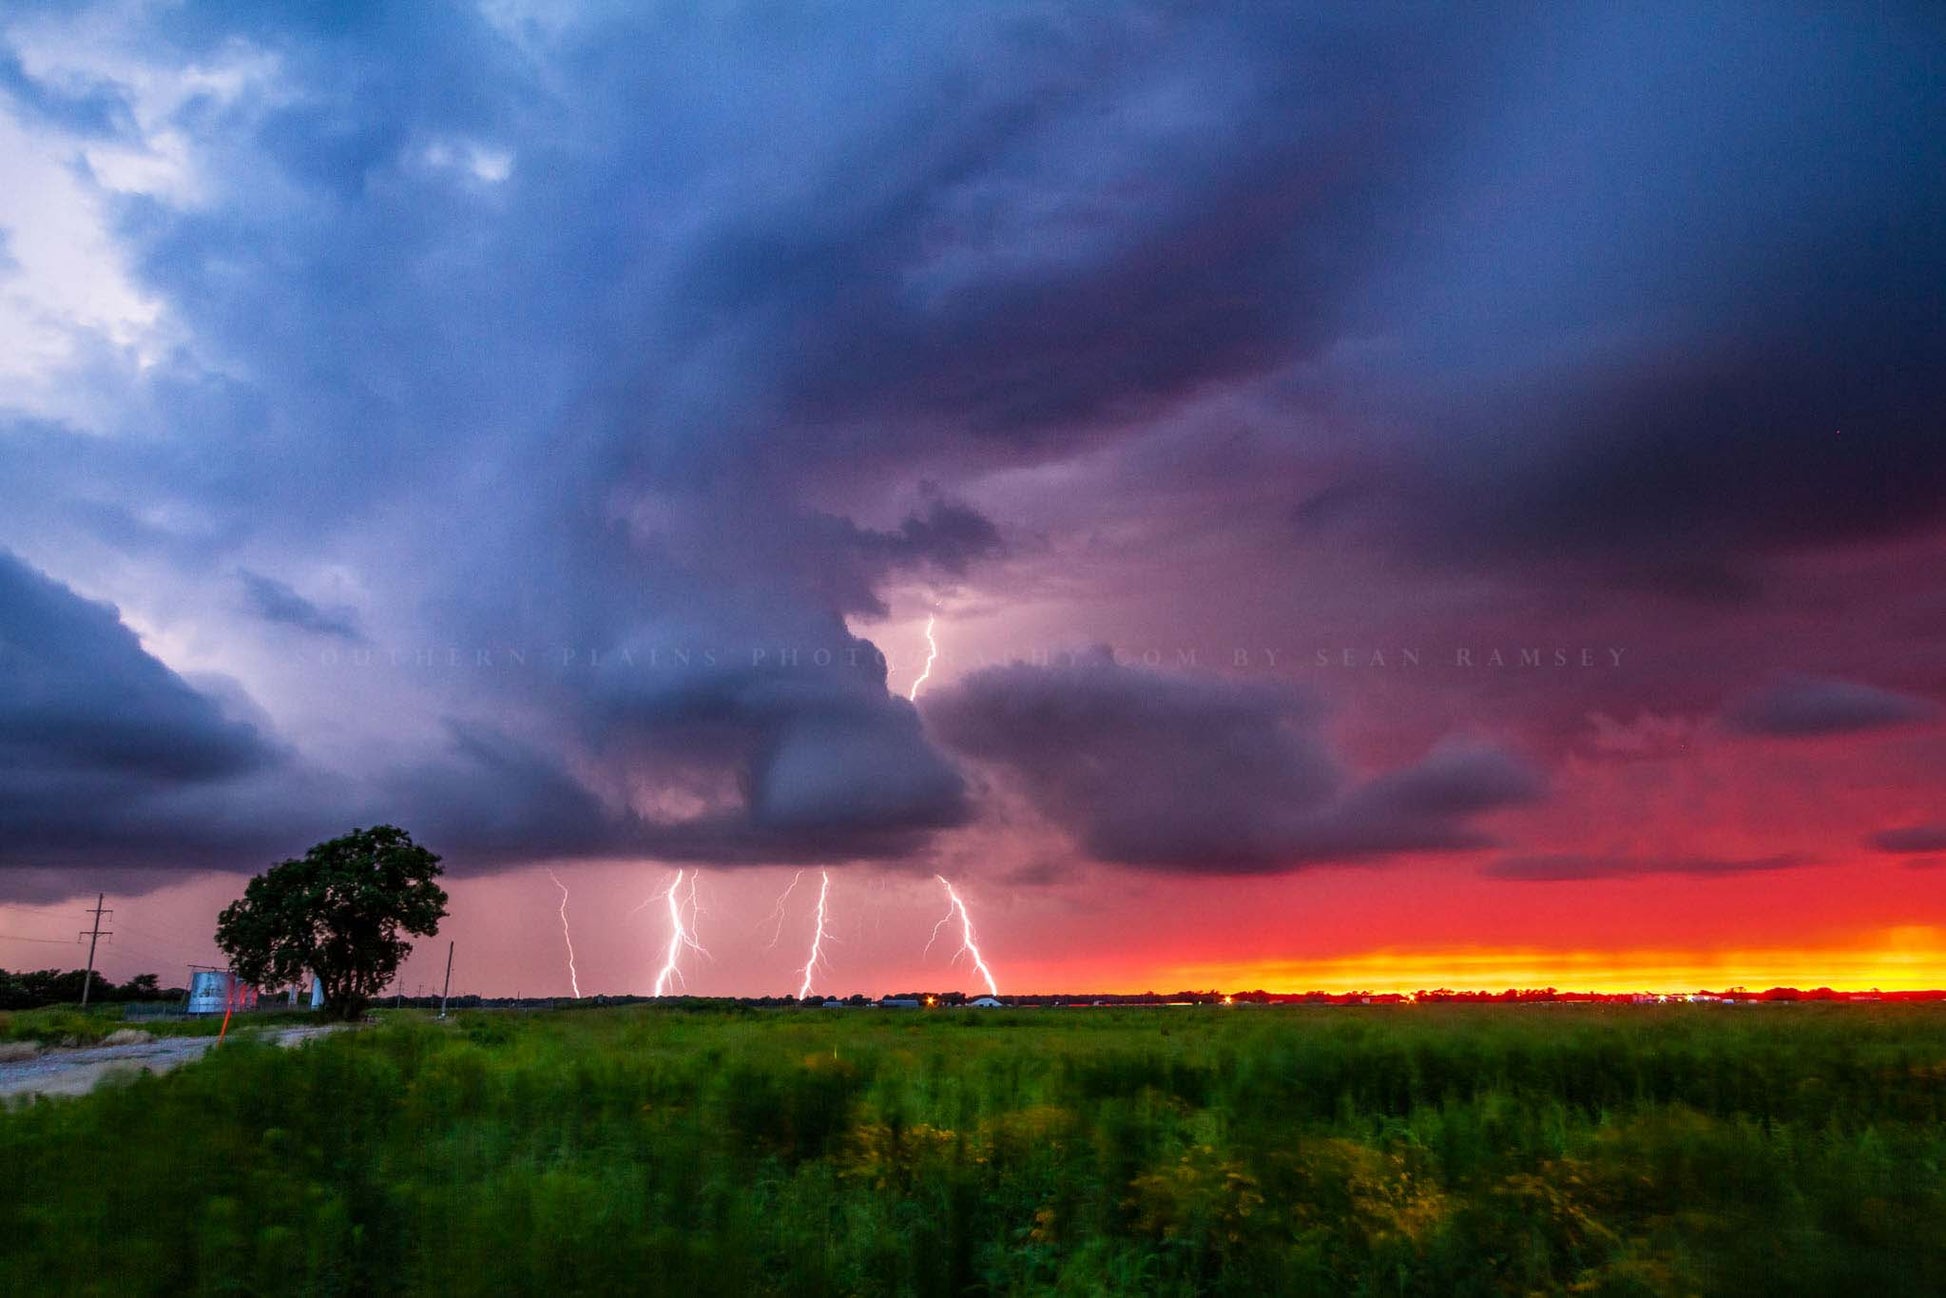 Storm photography print of multiple lightning bolts striking during a summer thunderstorm at sunset on a stormy evening in Oklahoma by Sean Ramsey of Southern Plains Photography.